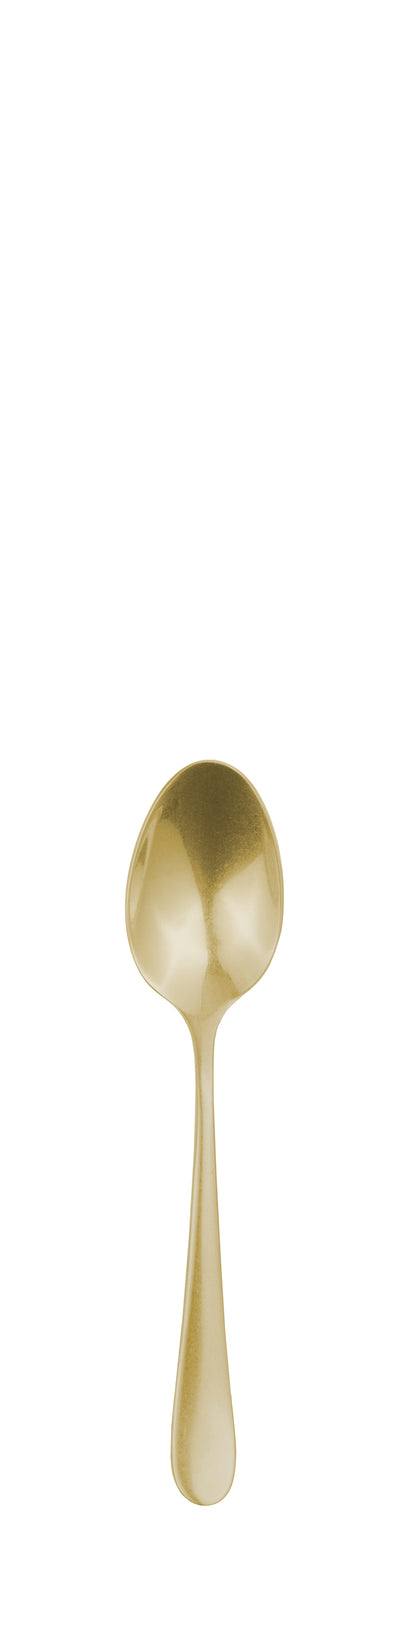 Coffee/tea spoon large SIGNUM PVD pale gold stonewashed 156mm